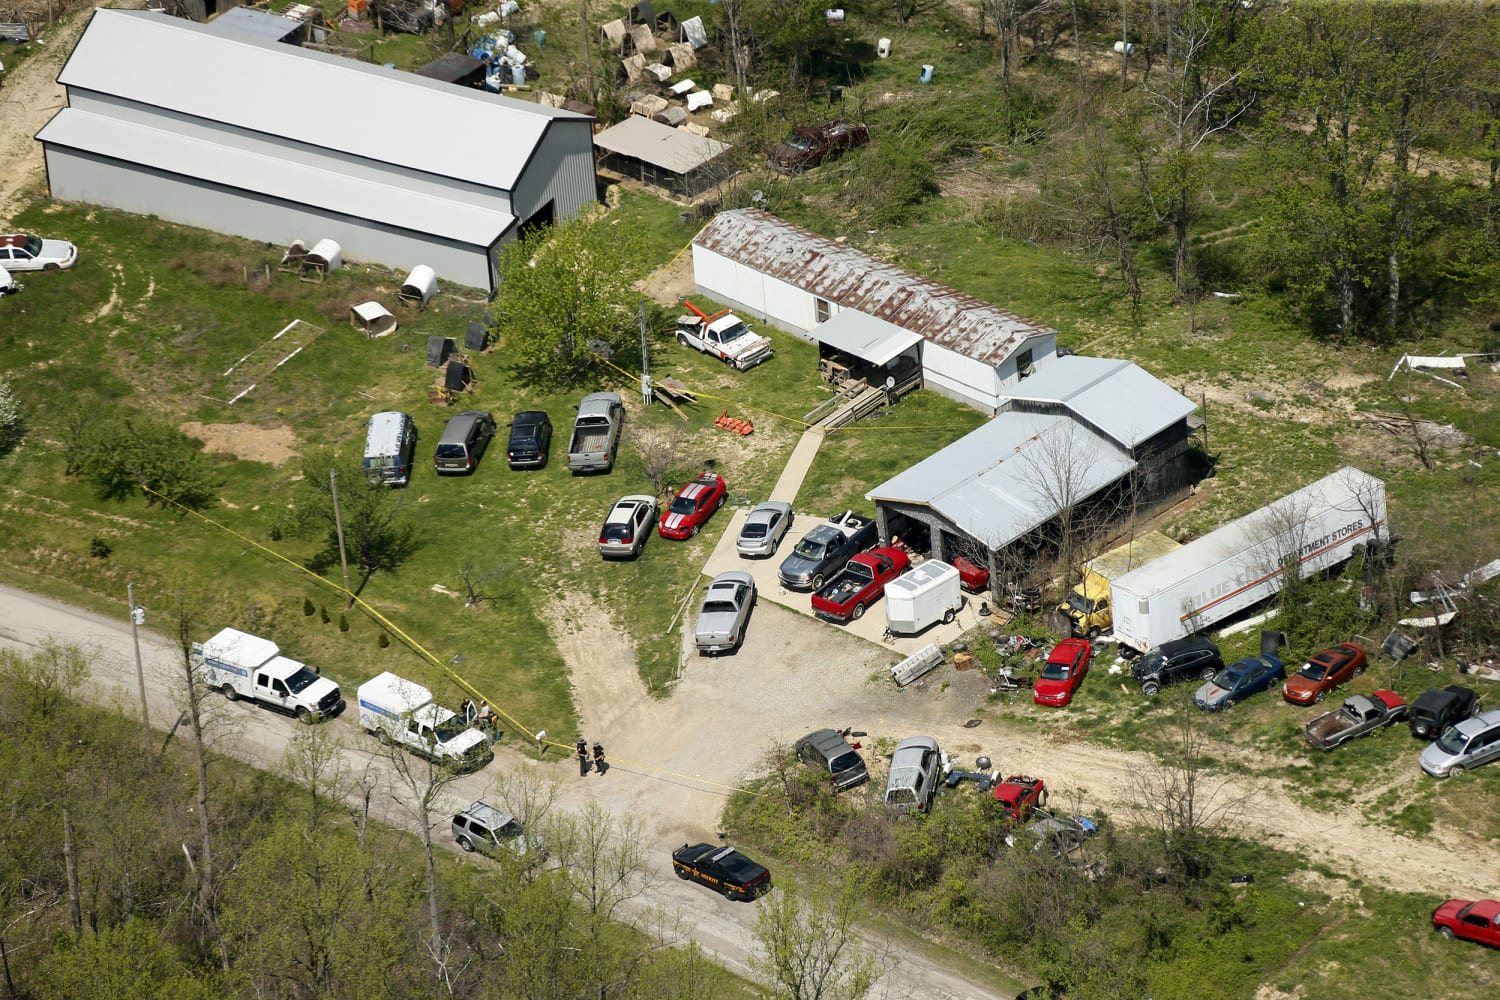 Pike County murders: What happened during the Pike County massacre?